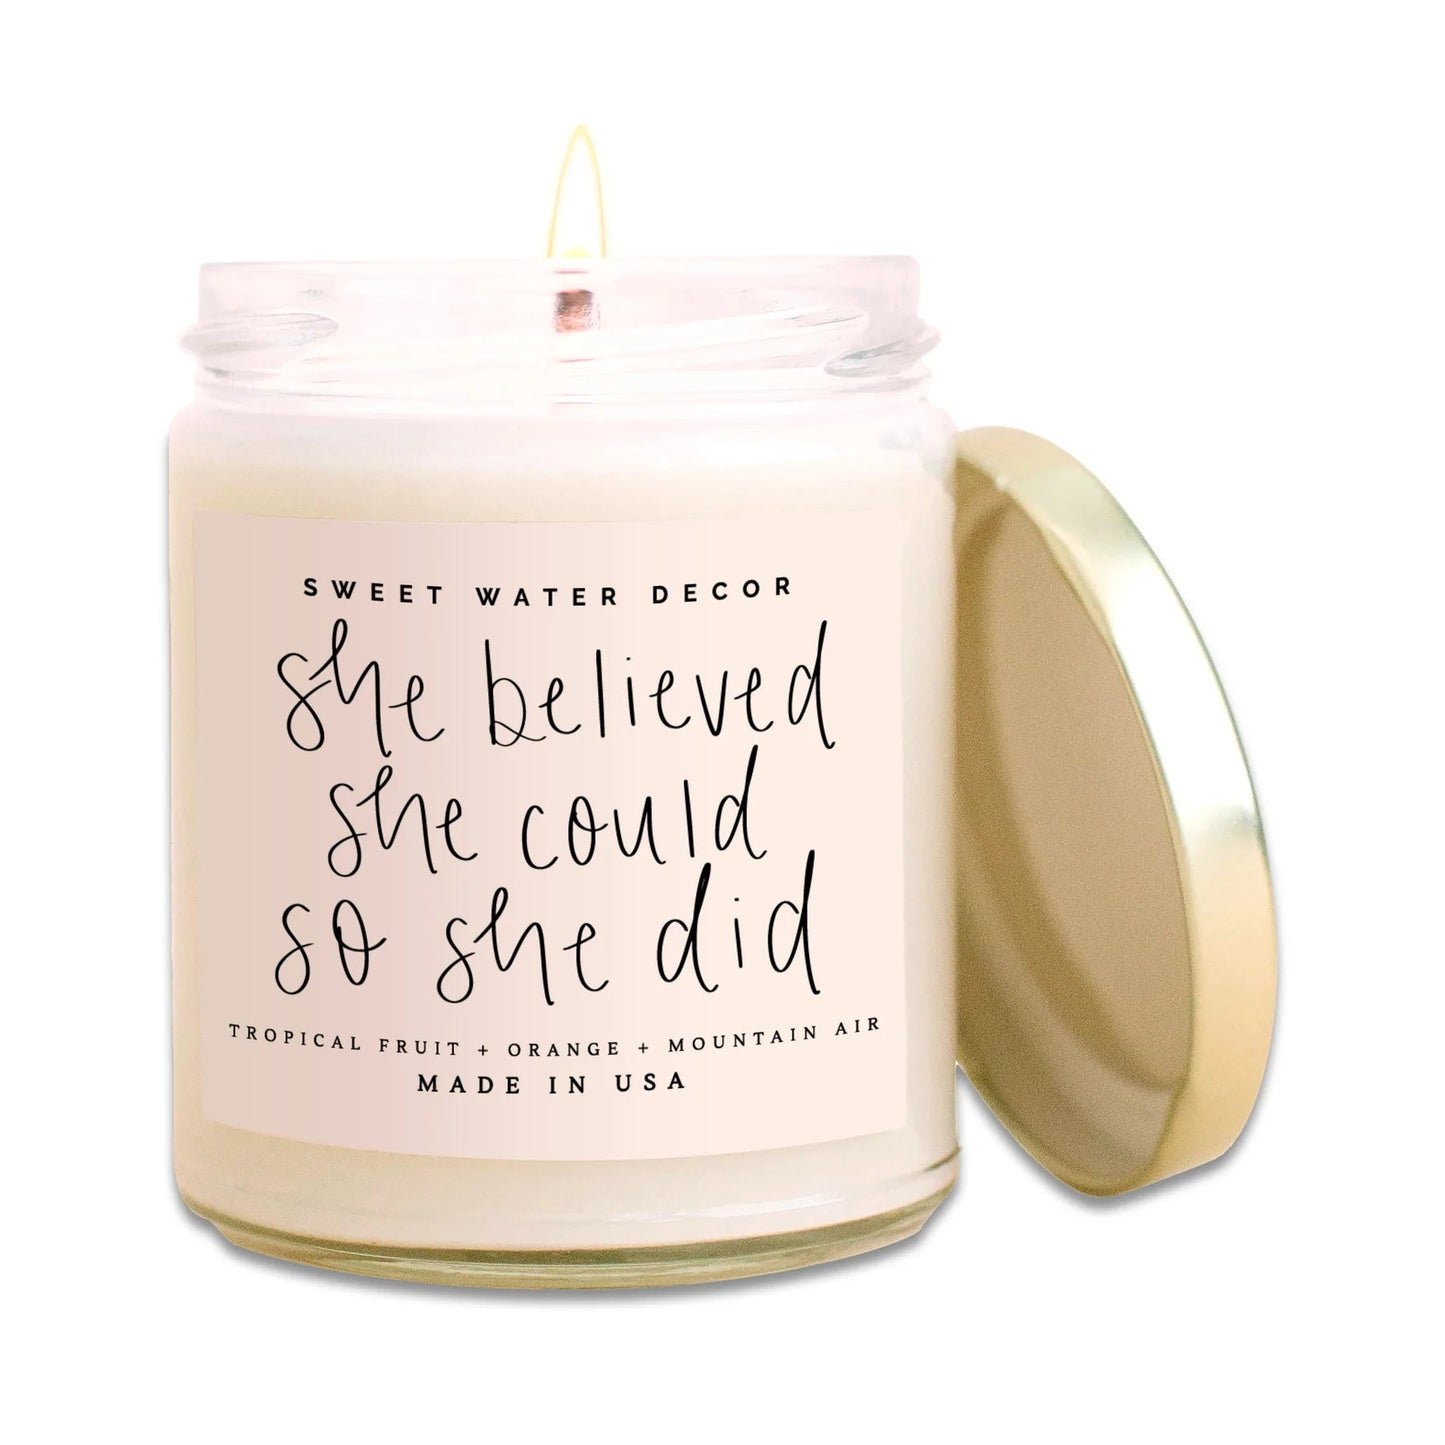 SHE BELIEVED SHE COULD SO SHE DID SOY CANDLE - CLEAR JAR - 9 OZ